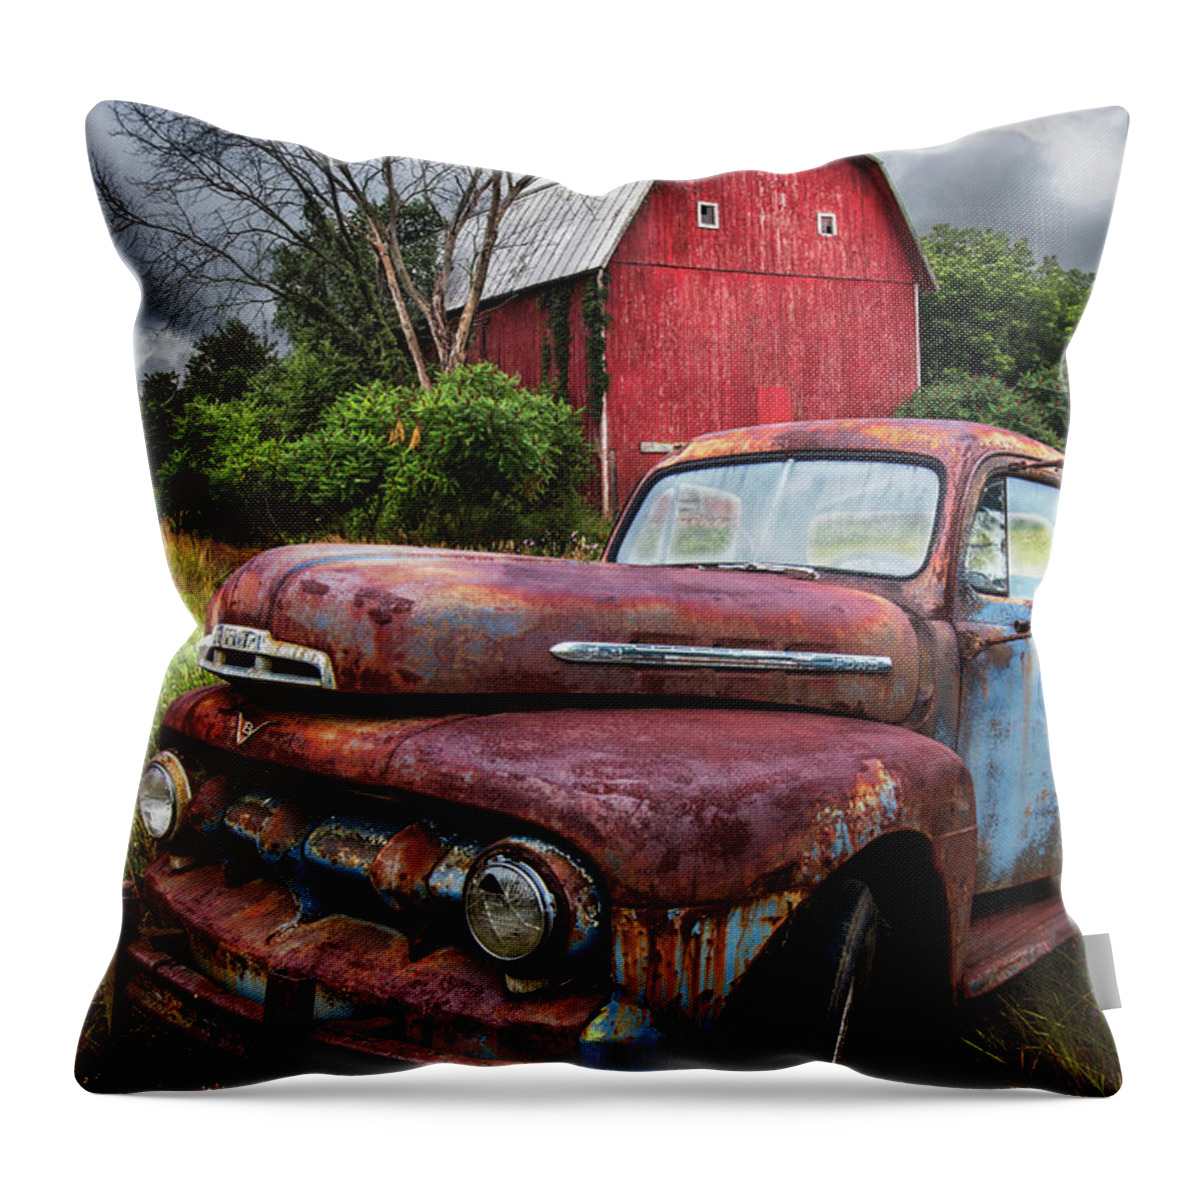 1940 Throw Pillow featuring the photograph The Old Red Barn Truck by Debra and Dave Vanderlaan